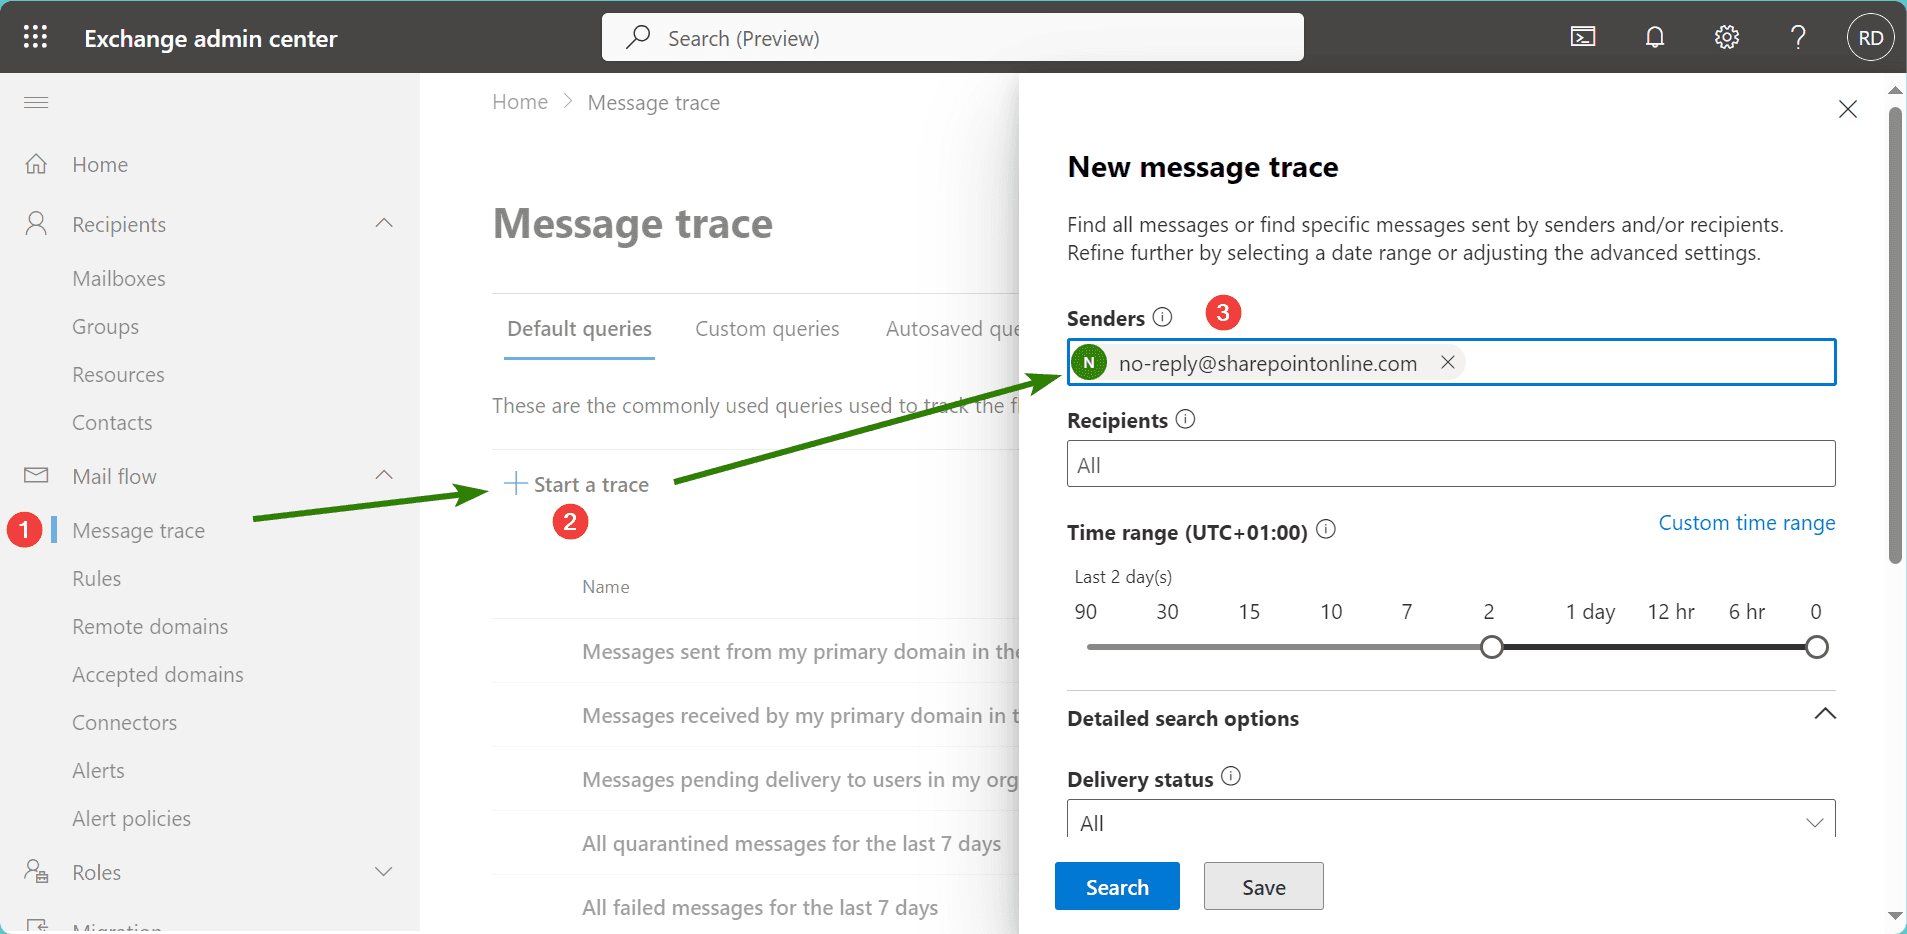 Configuring the message trace options